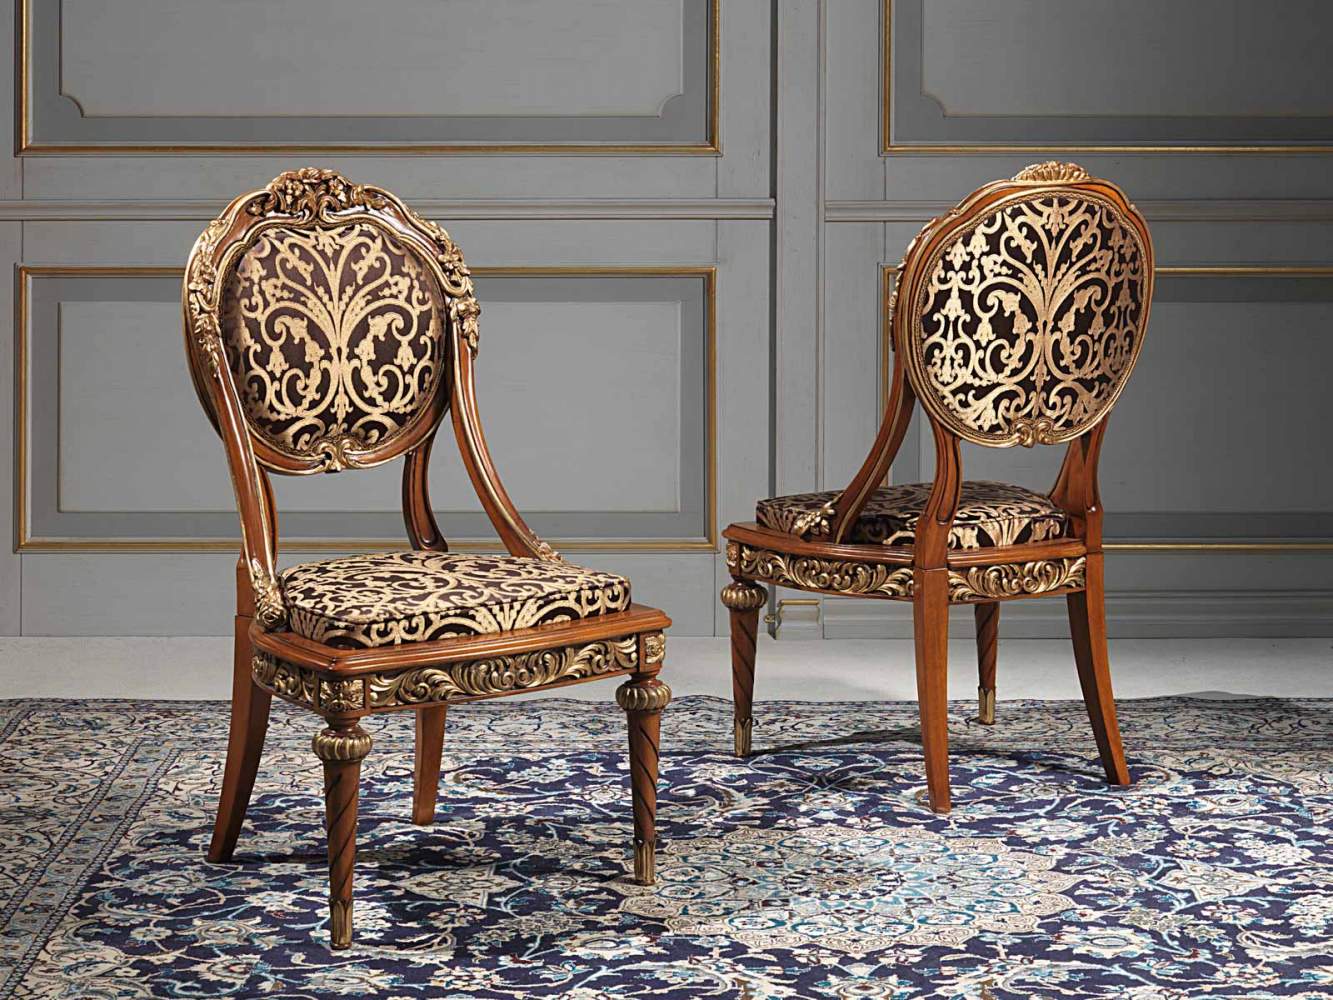 Versailles chairs in Louis XVI style